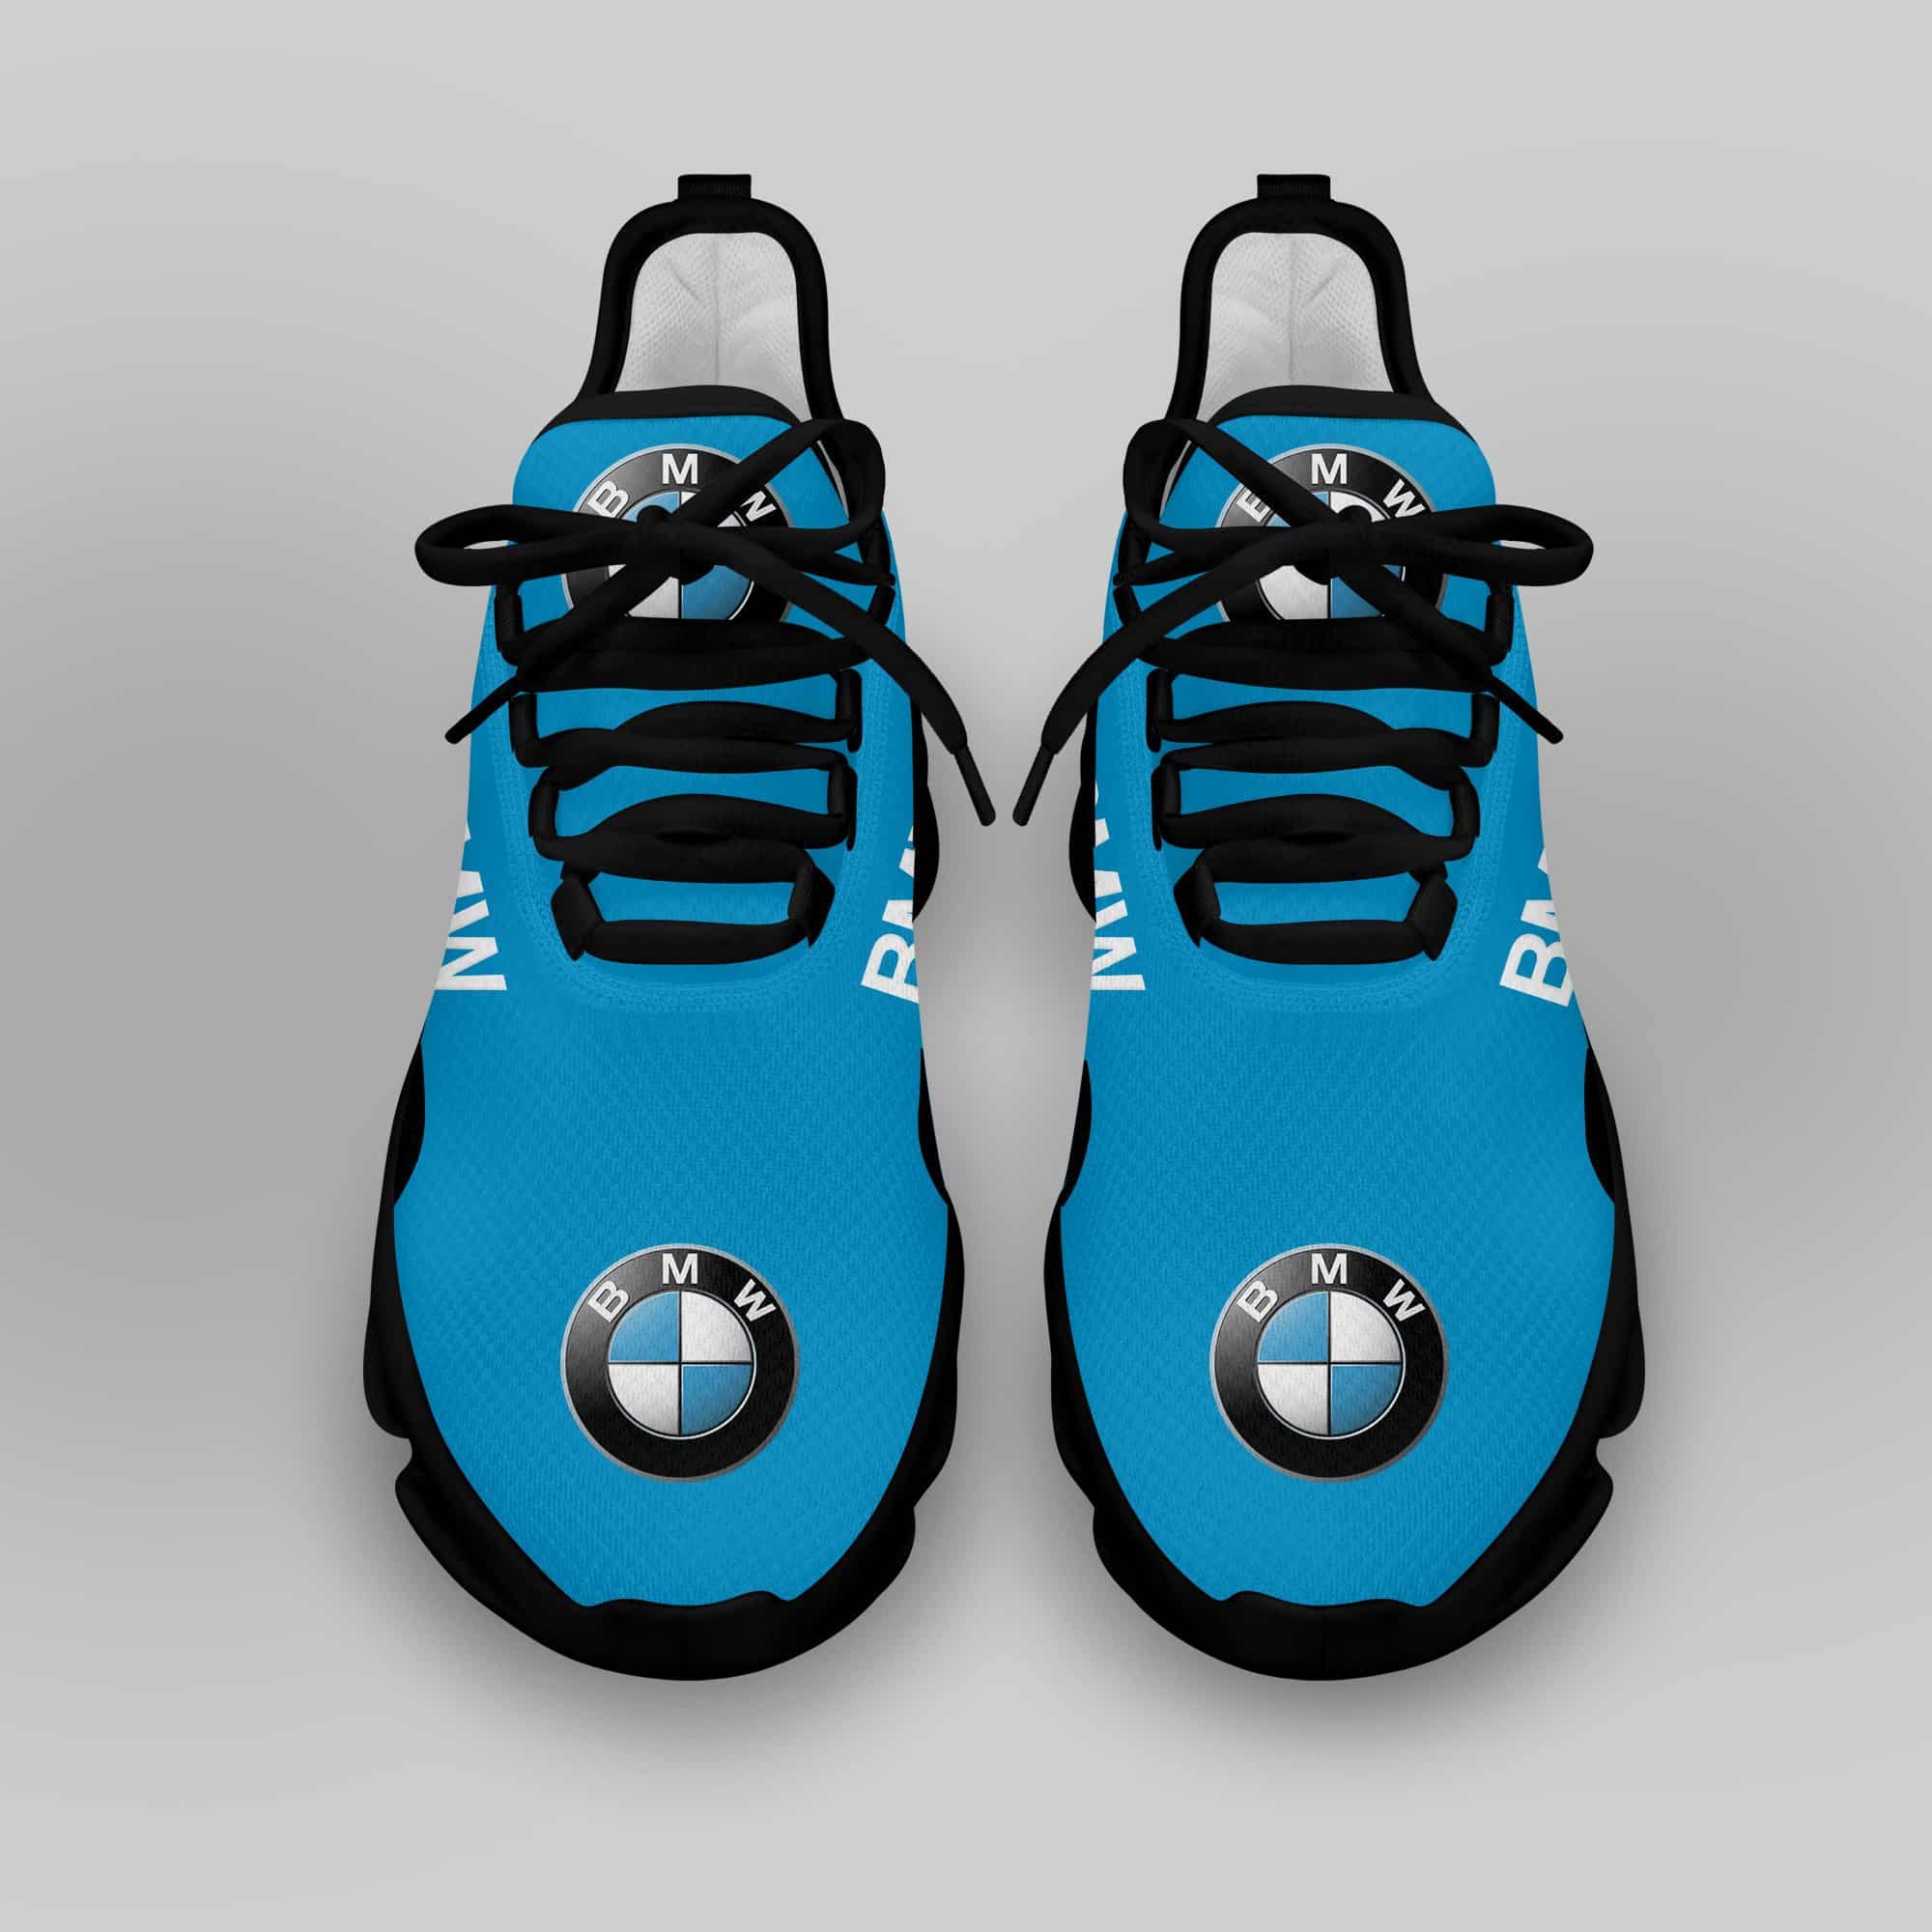 Bmw Running Shoes Max Soul Shoes Sneakers Ver 52 4